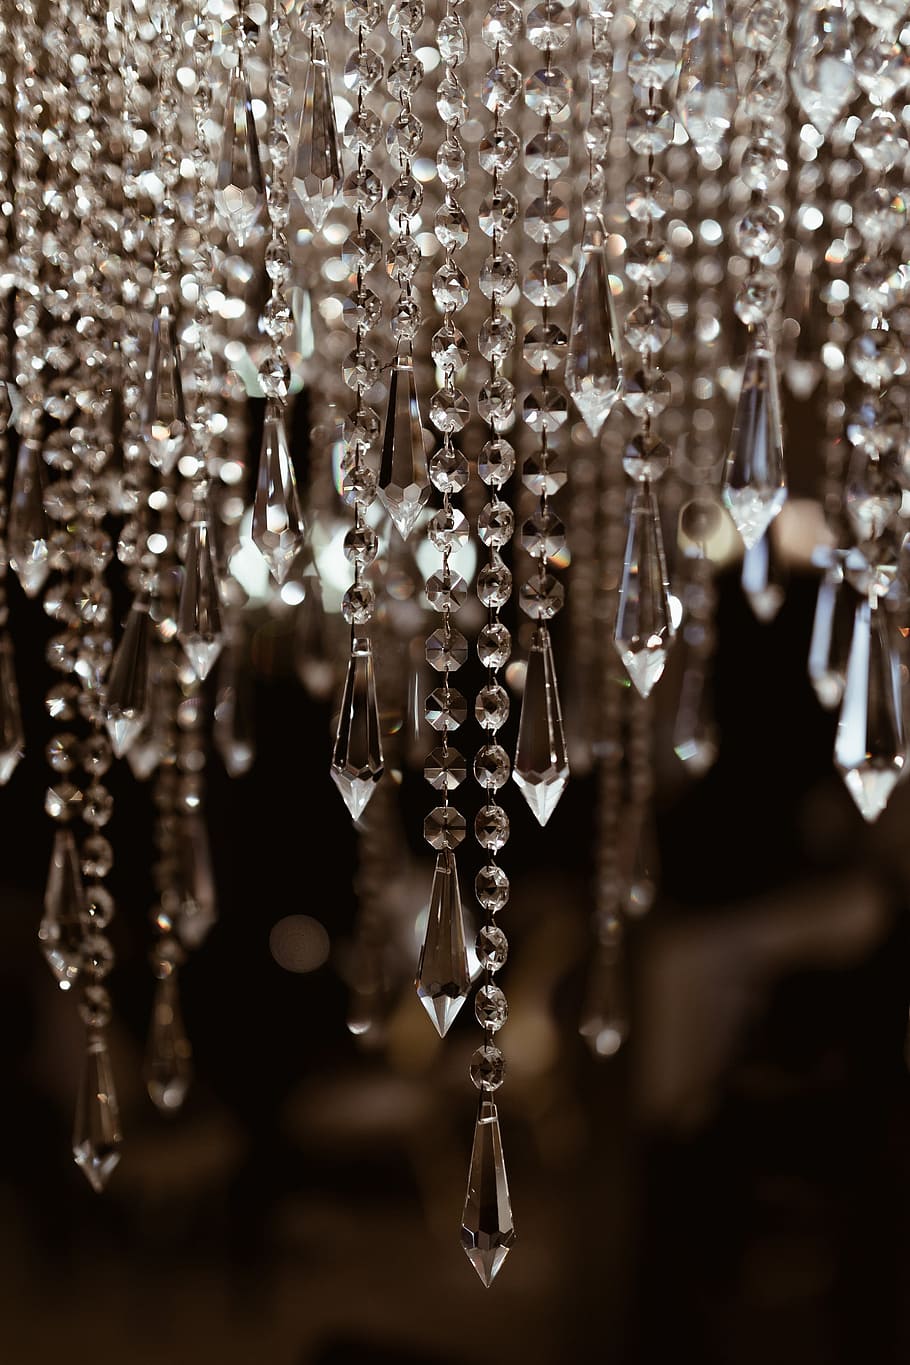 40 Chandelier HD Wallpapers and Backgrounds